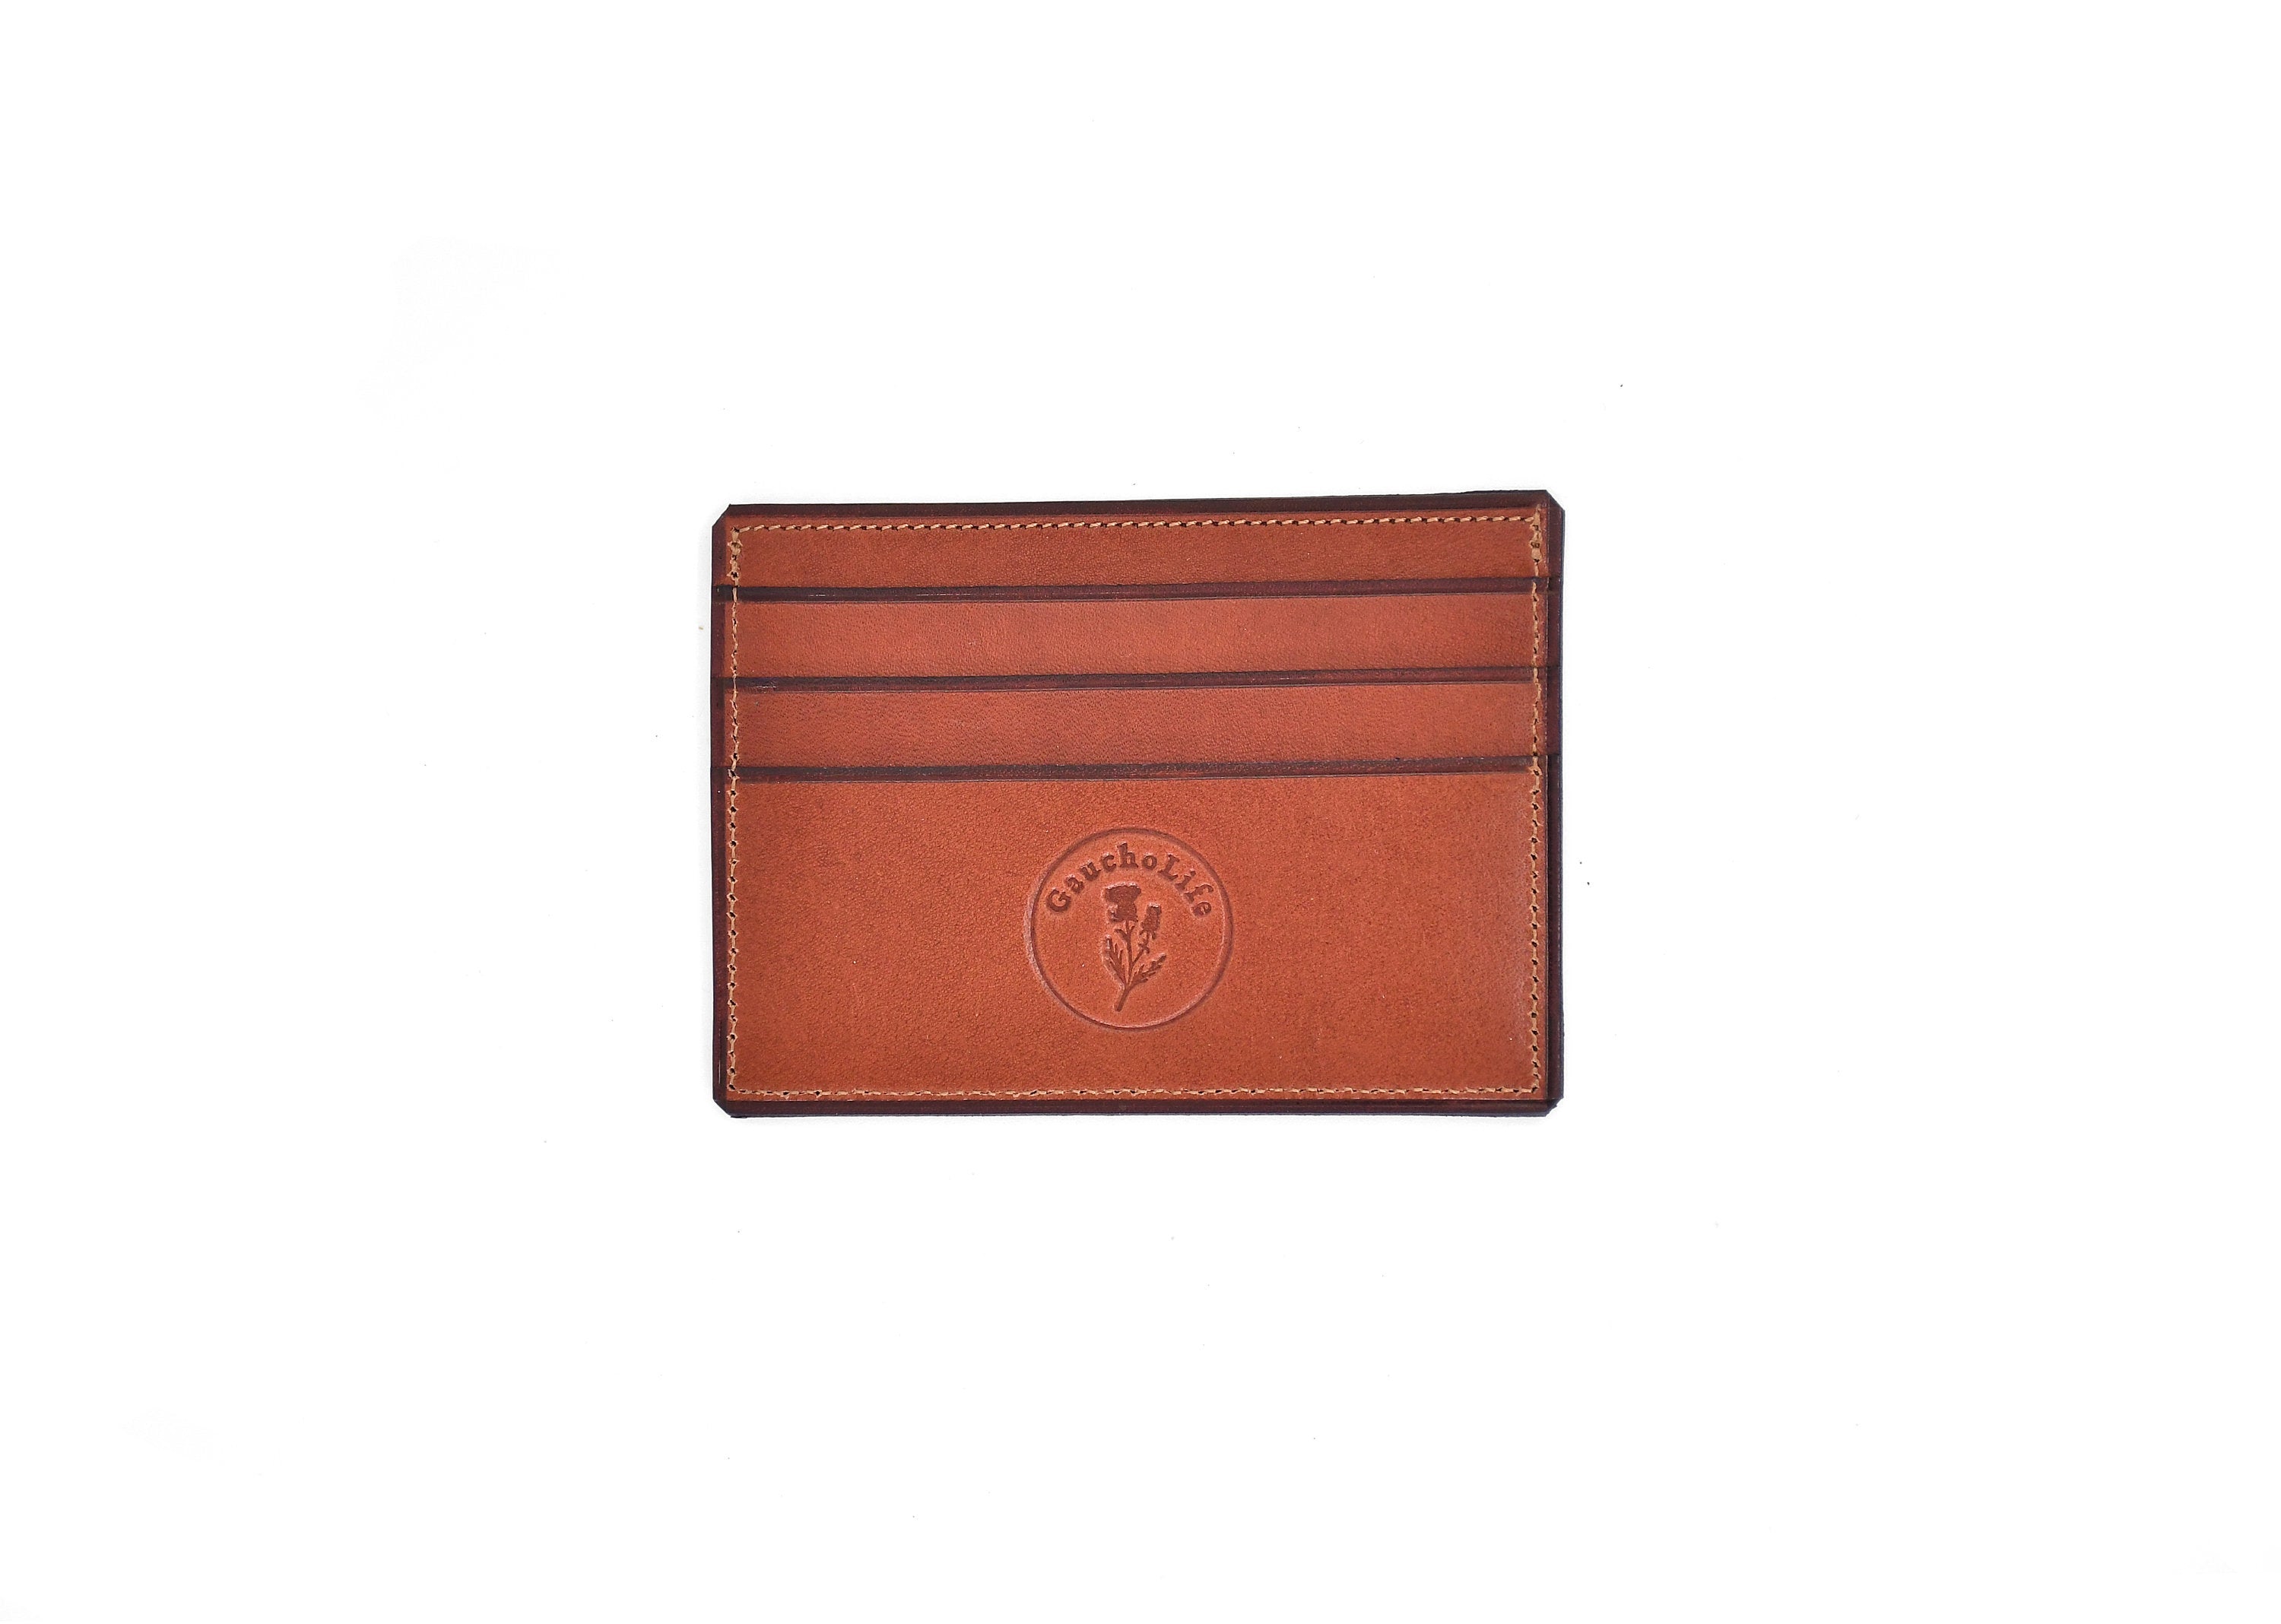 Gaucholife Wallet Thin Woven Leather Card Holder (Greek)